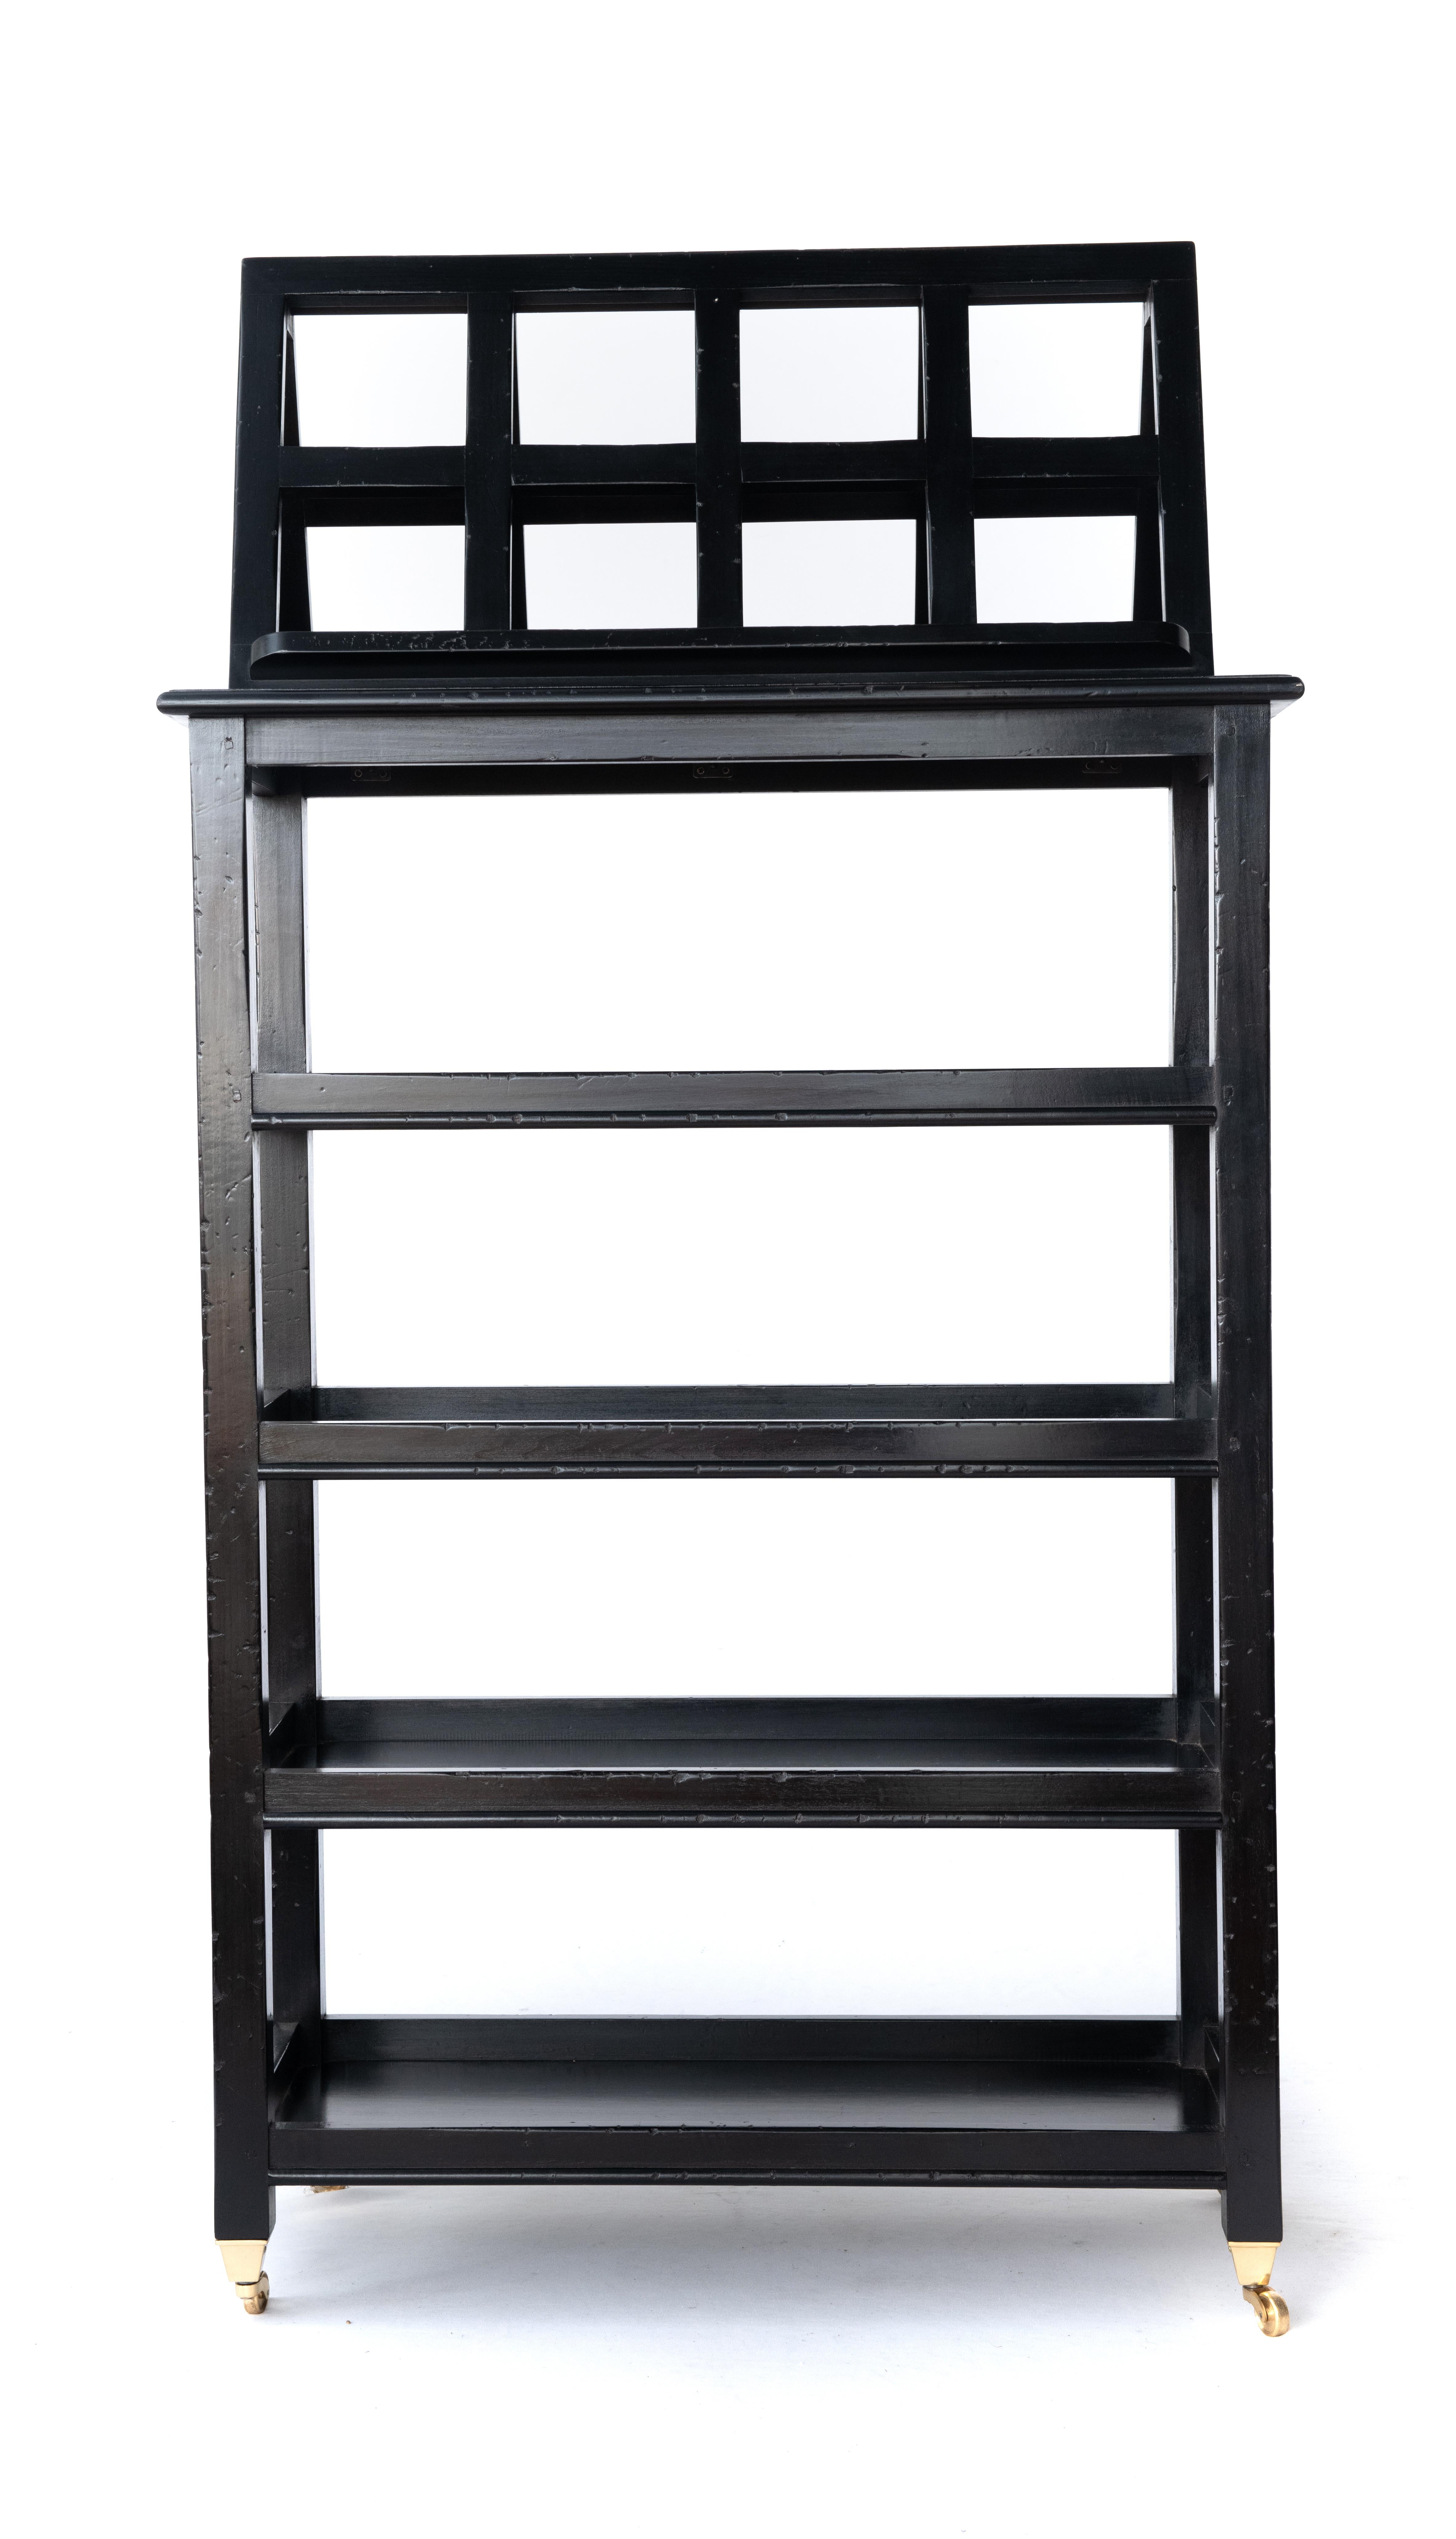 A most stylish four-tier étagère with folding lectern or book stand on solid brass casters. The removable folding lectern is ideal for the display of books, maps, or art. Finished on all sides so it can float in a room with books or artwork